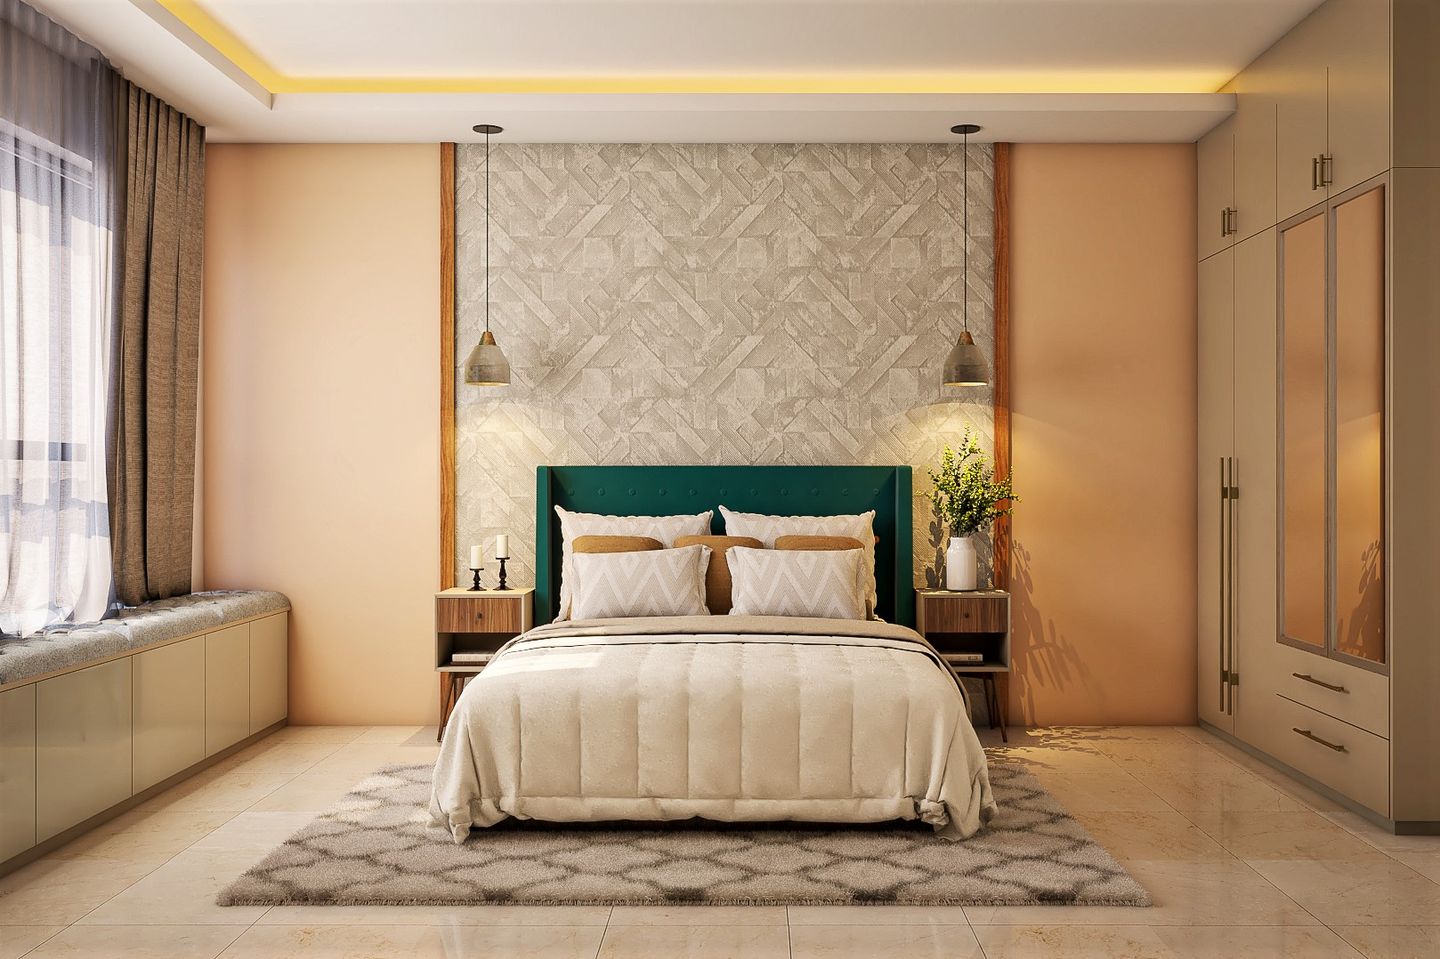 Modern Guest Room Design With Beige Theme | Livspace